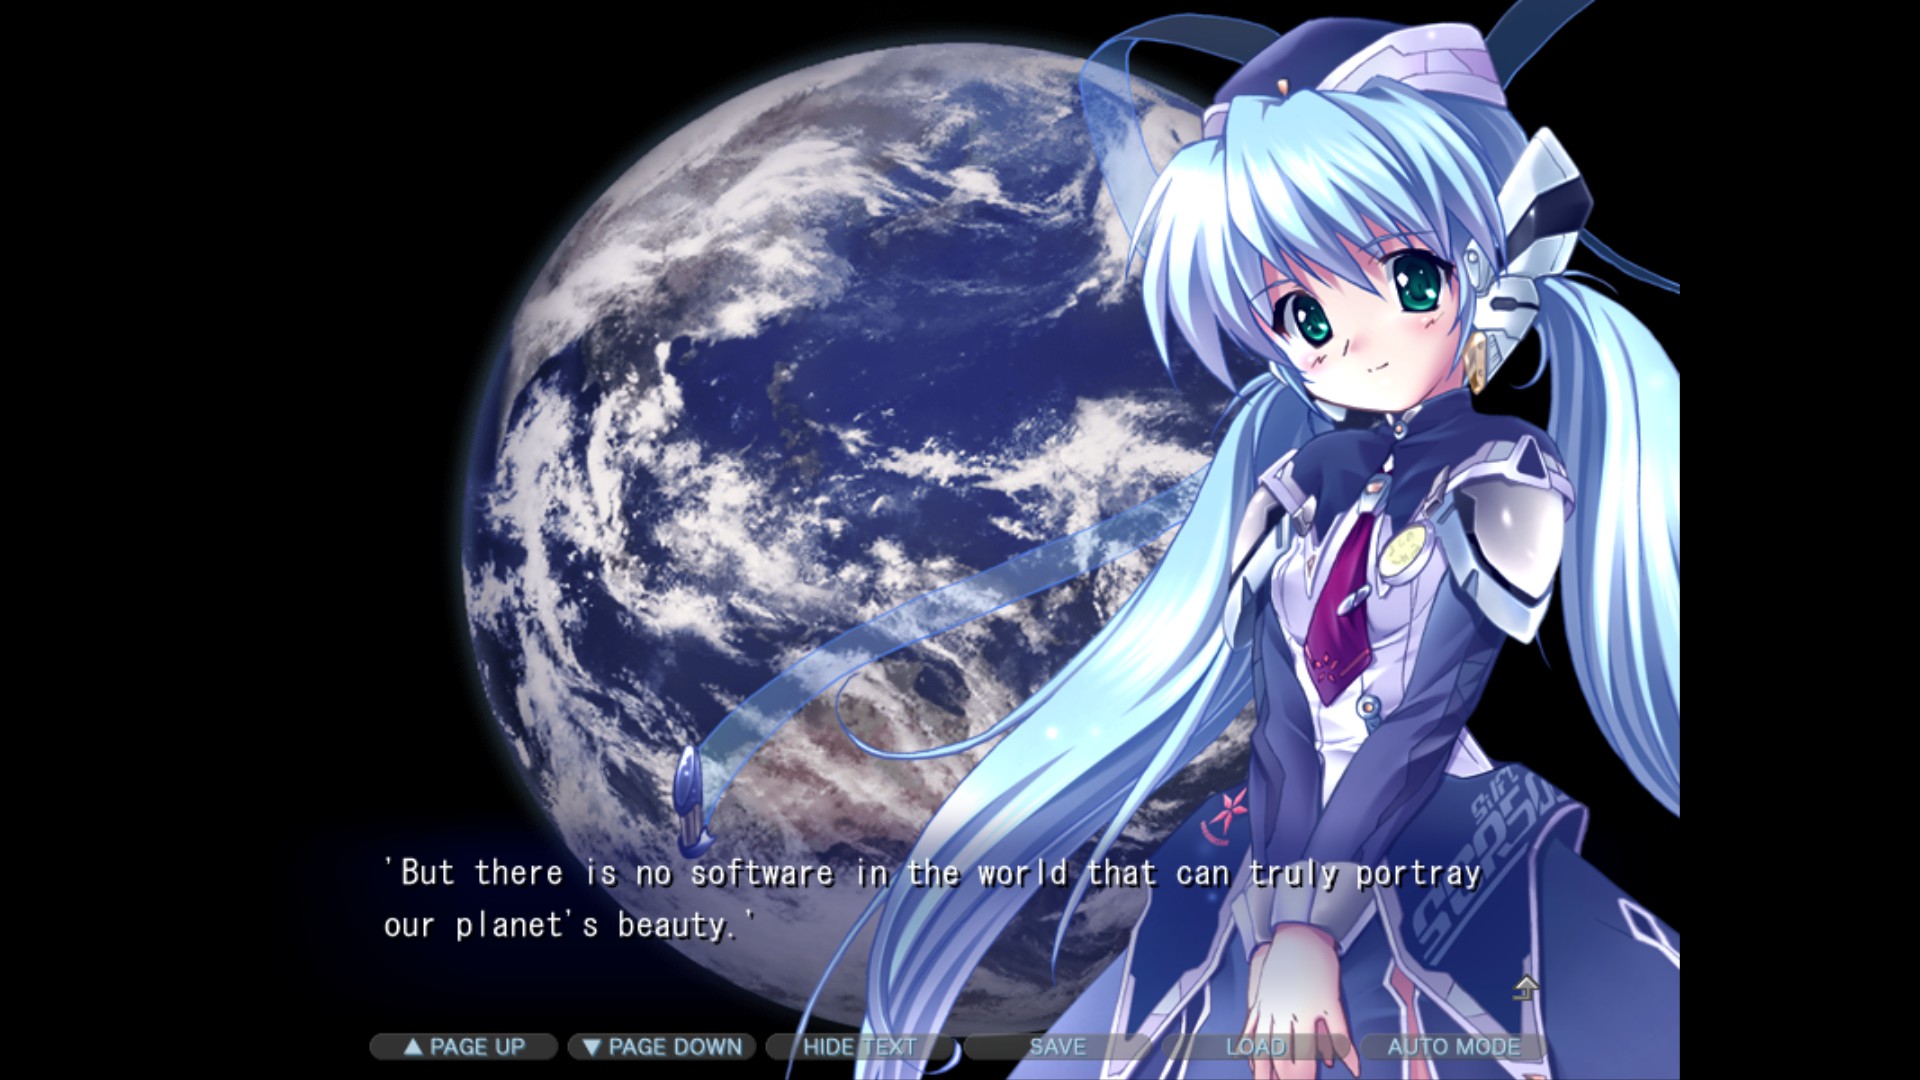 Planetarian The Reverie Of A Little Planet Wallpapers Anime Hq Planetarian The Reverie Of A Little Planet Pictures 4k Wallpapers 19